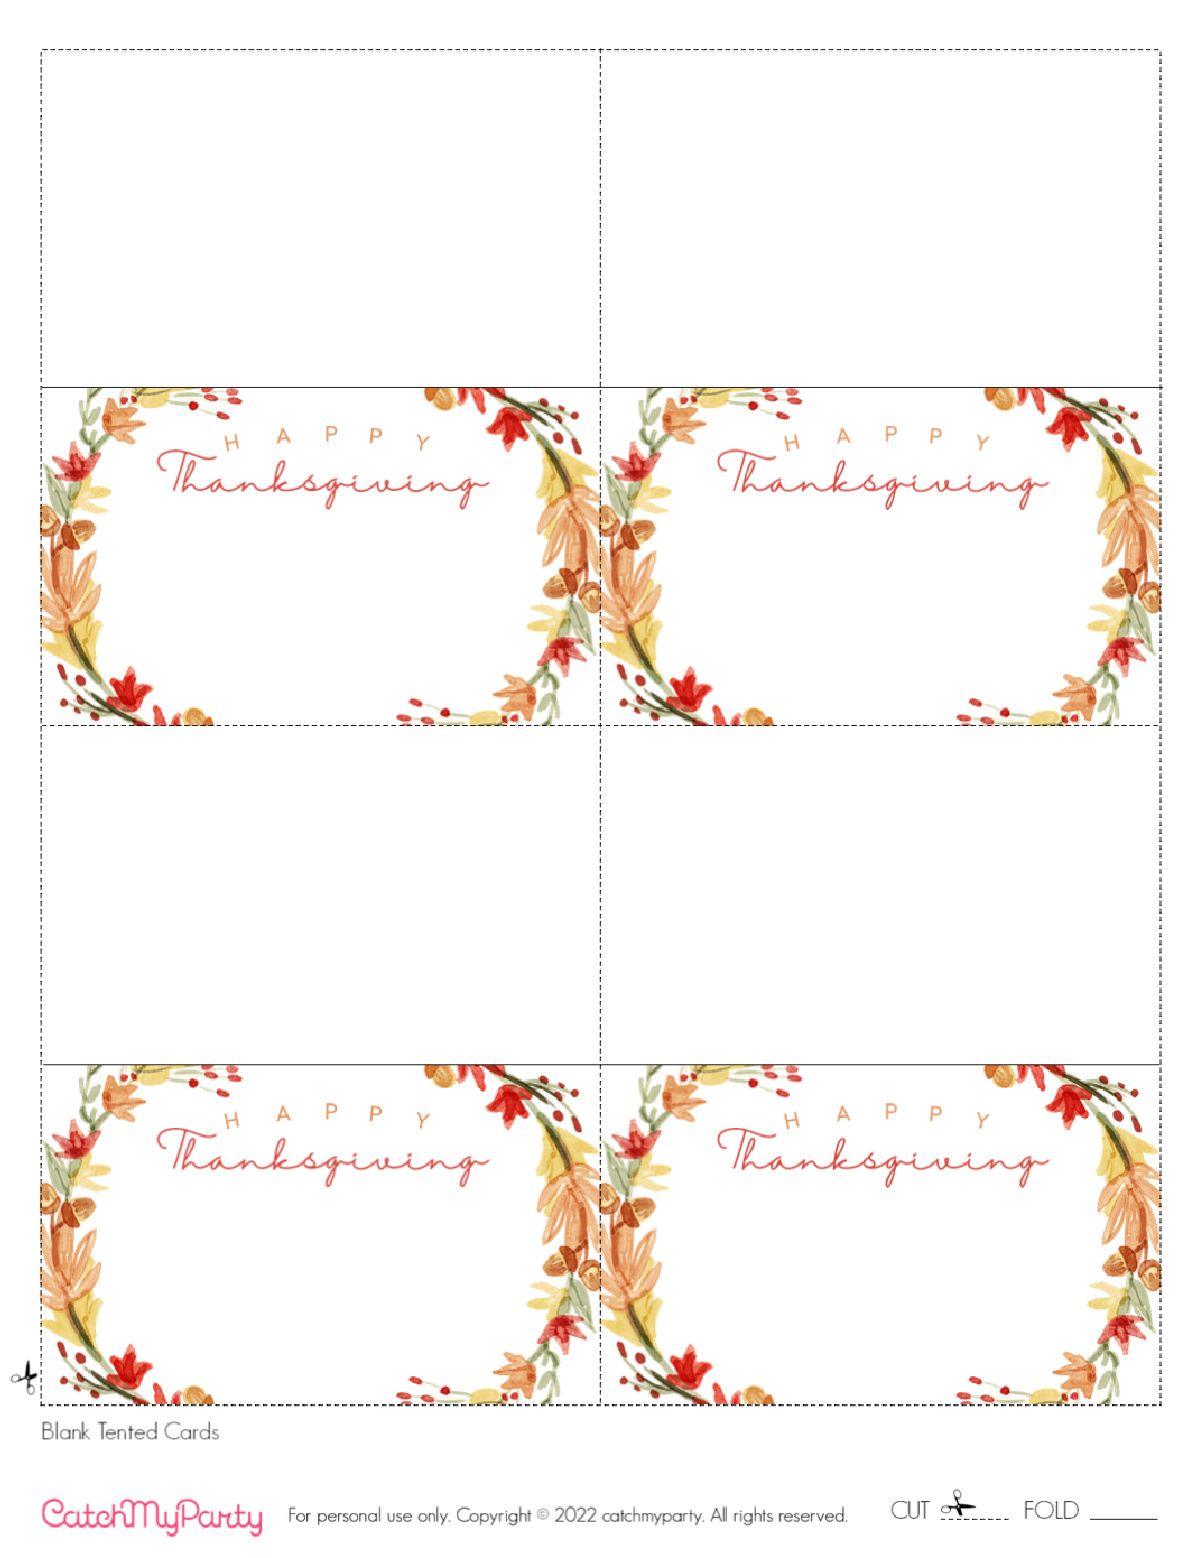 Download these FREE Thanksgiving Printables - Thanksgiving Blank Tented Cards